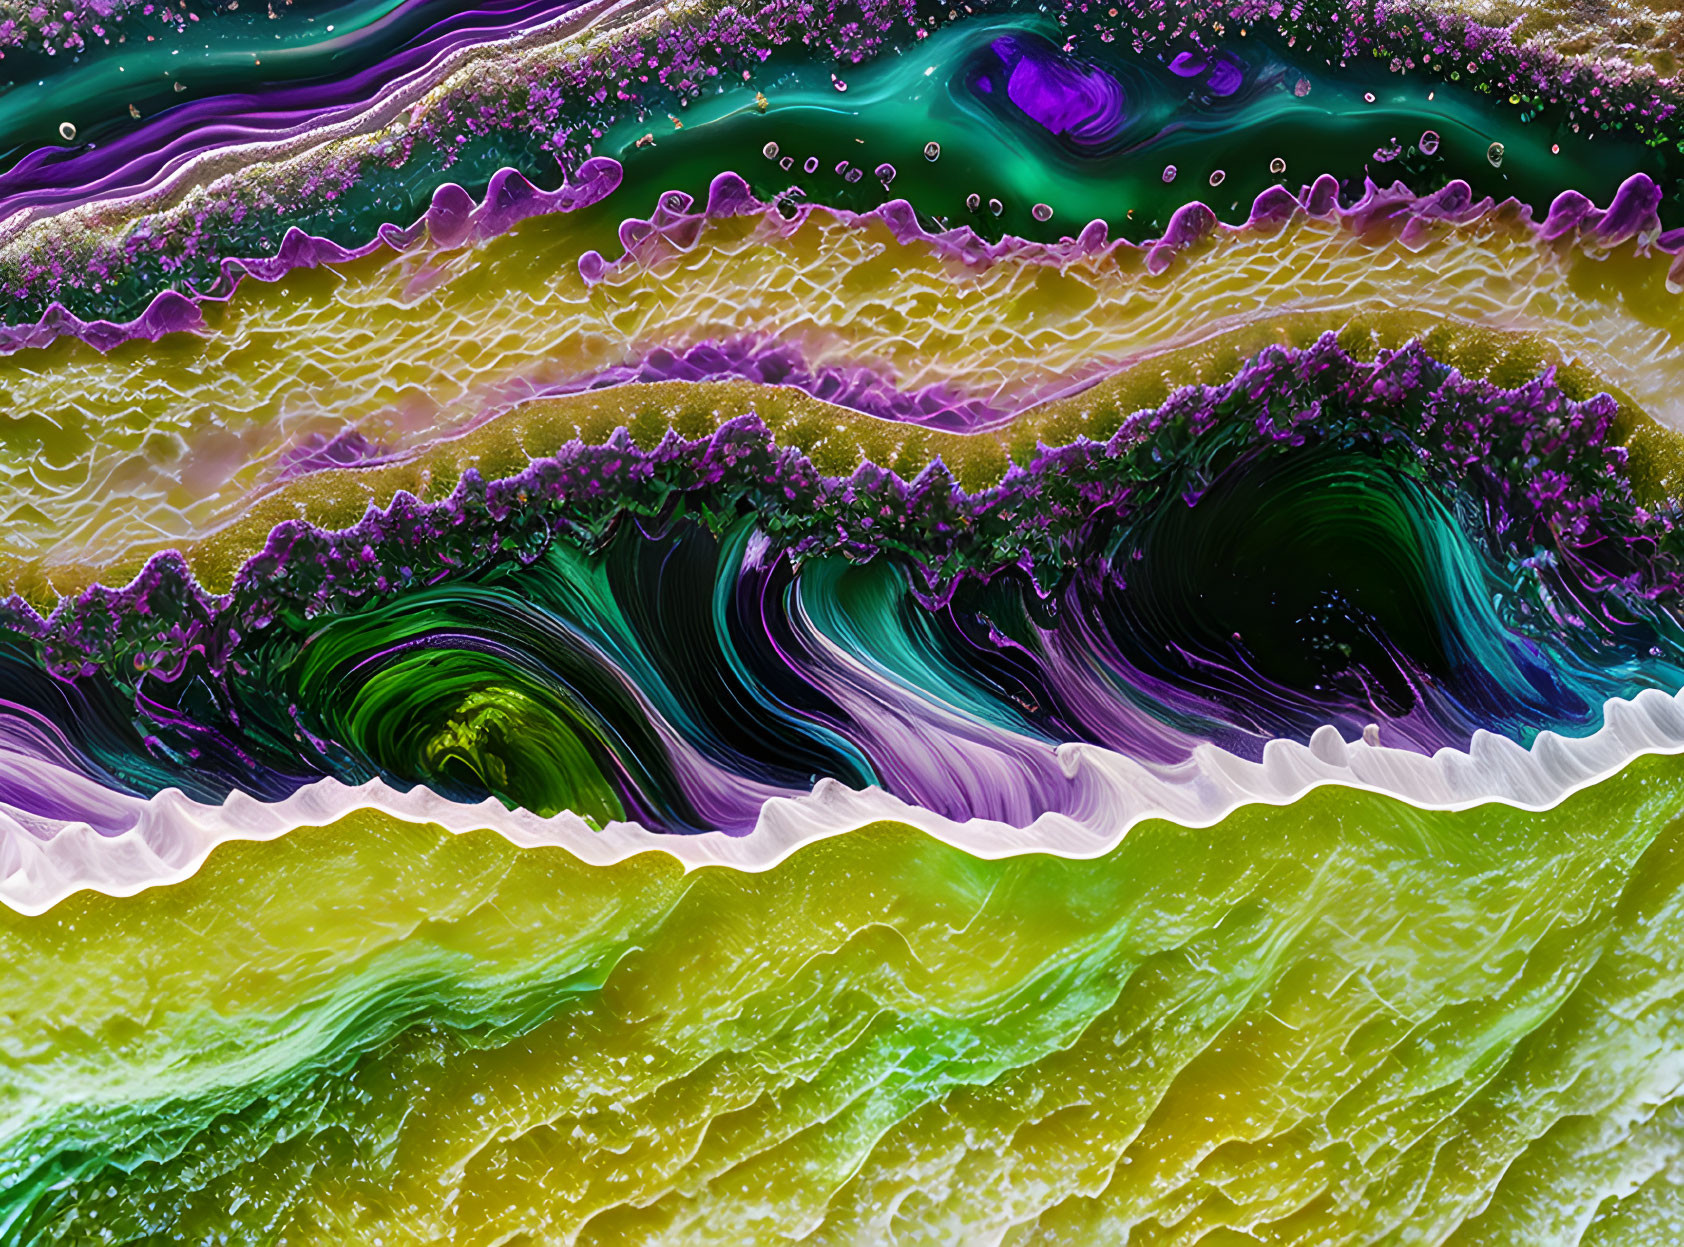 Abstract wavelike patterns in vibrant purple, green, and yellow hues with fluid textures